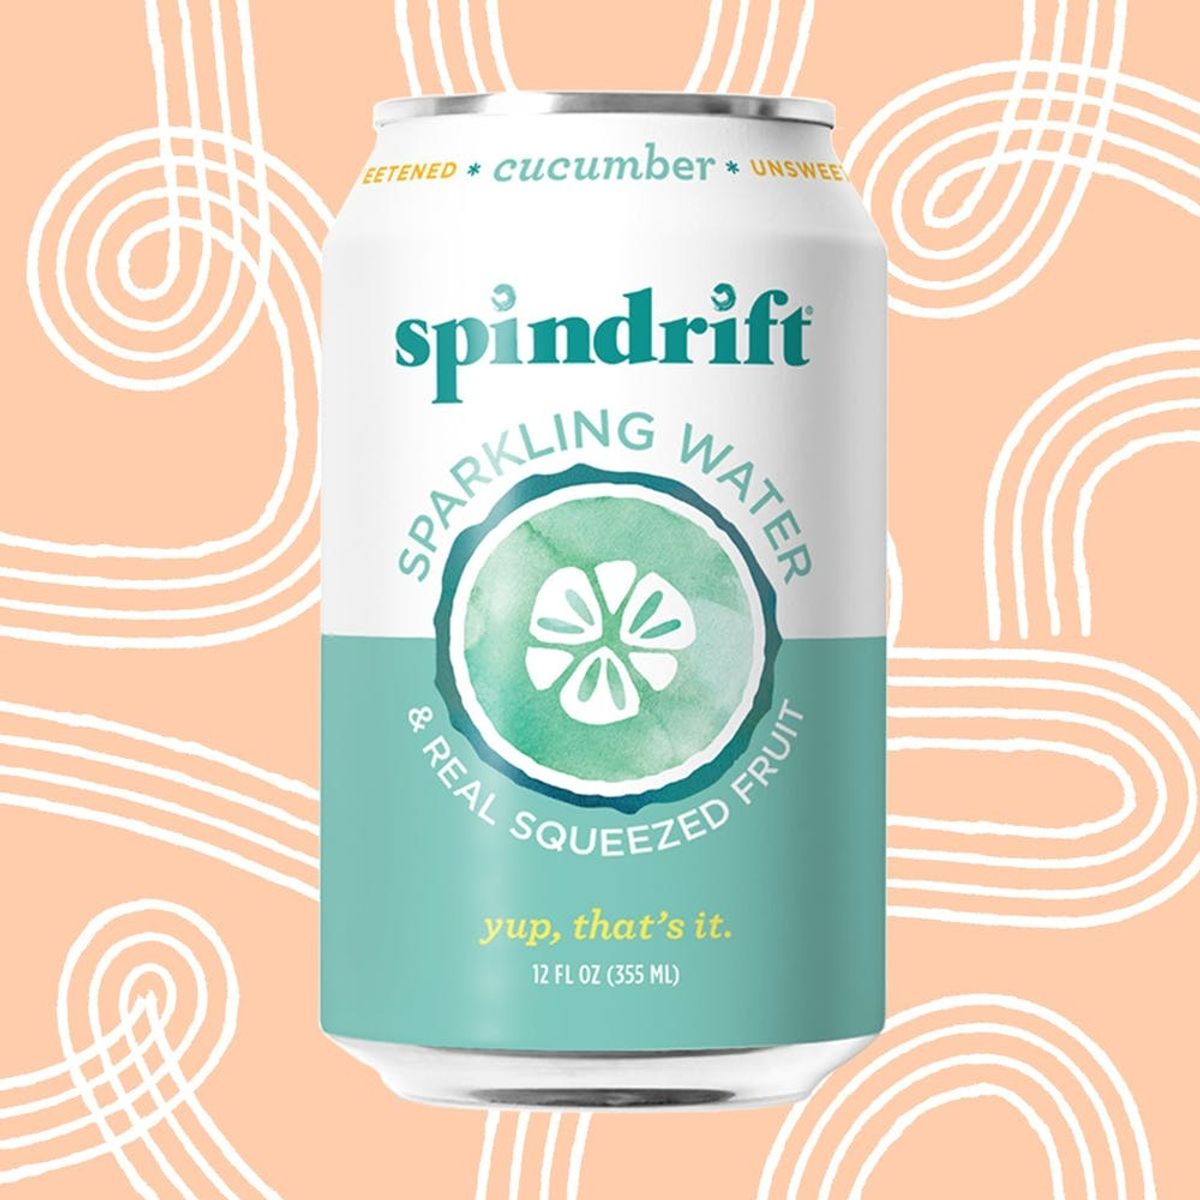 Spa Water and Seltzer Combine Forces in This Ultra-Refreshing Drink